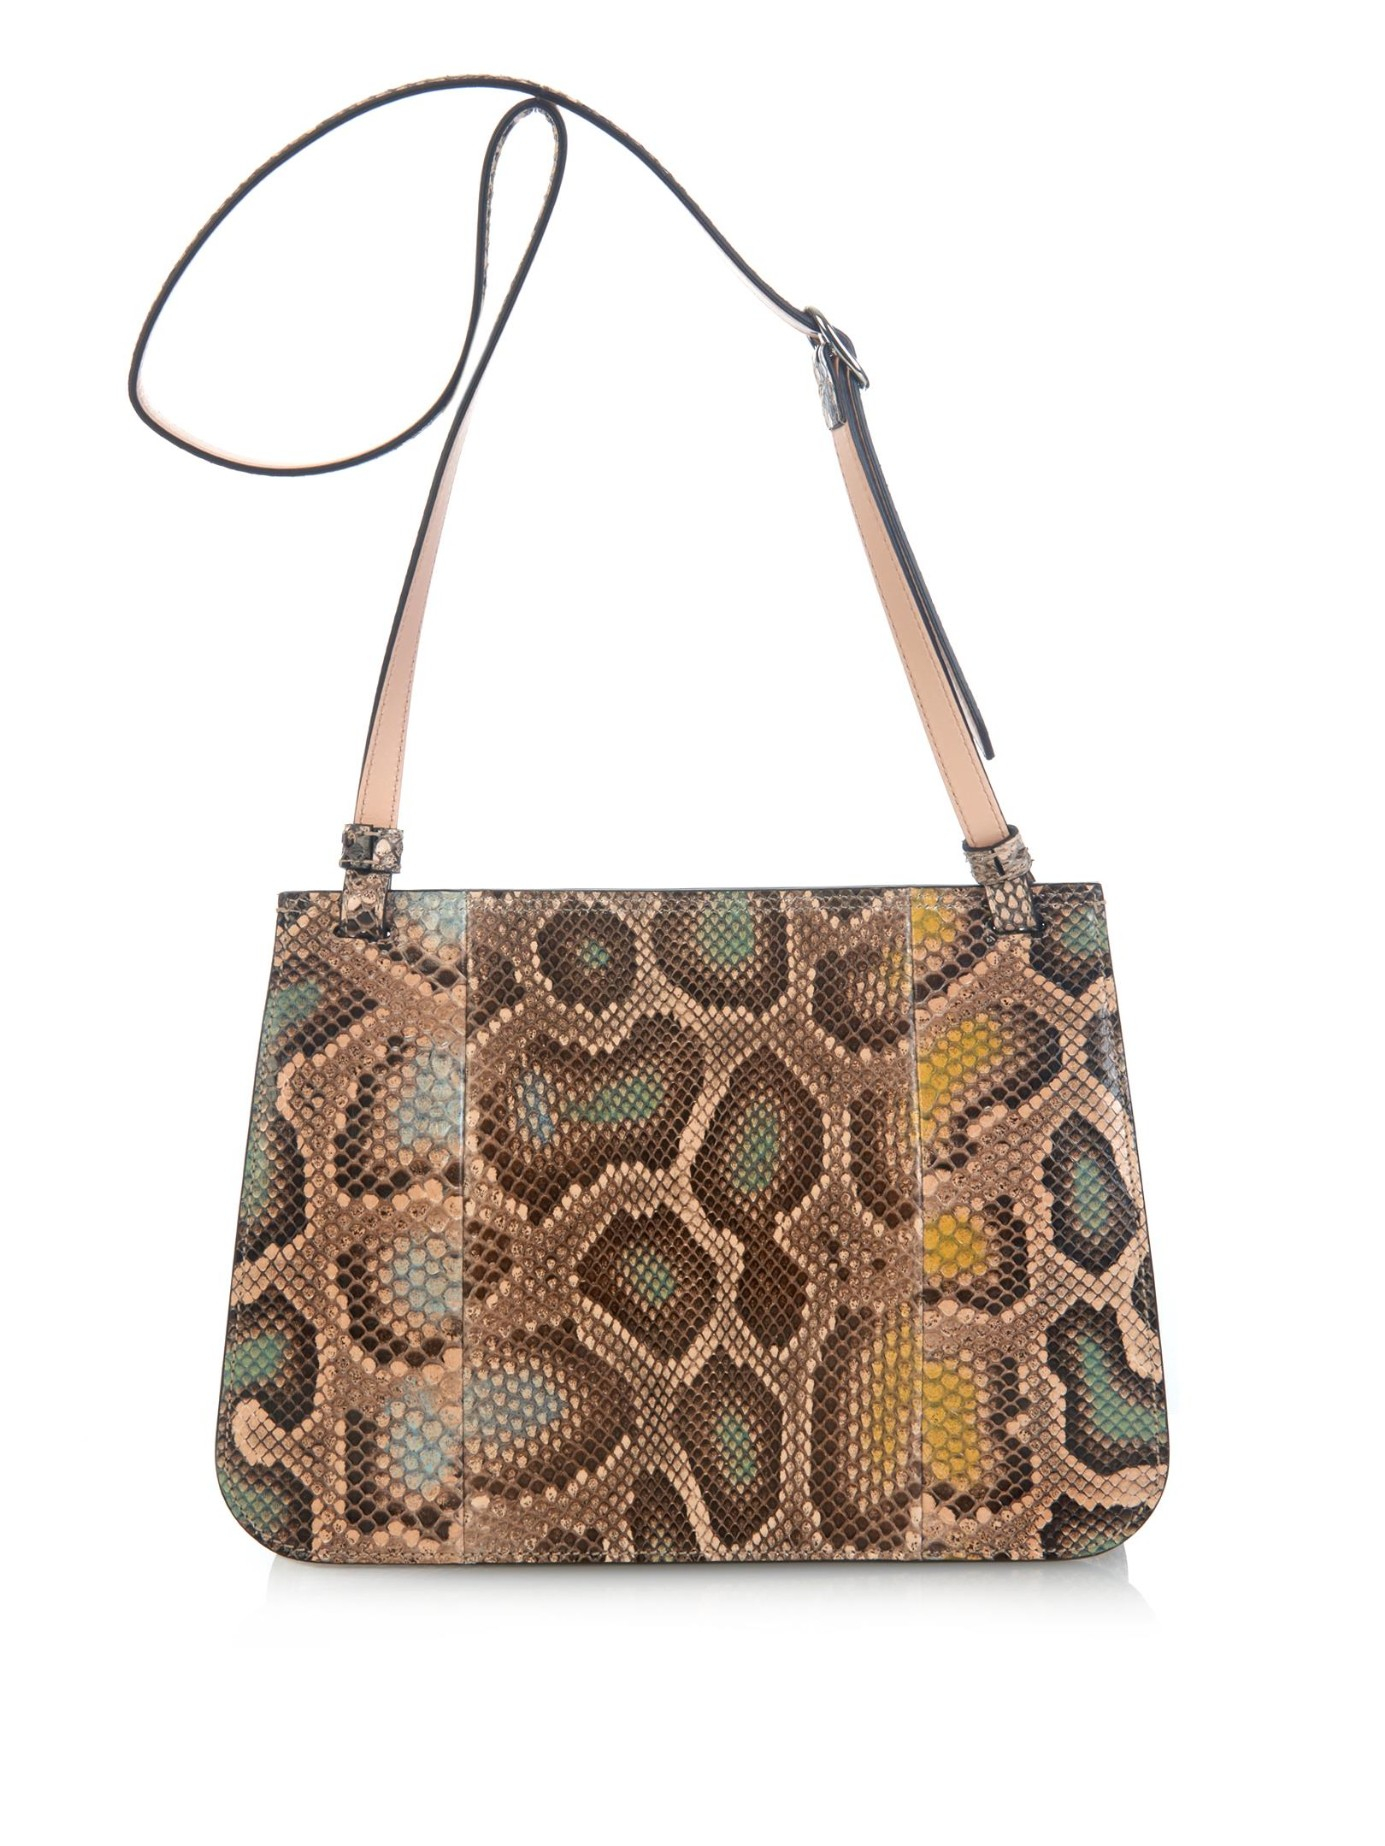 Gucci Bamboo Daily Python Cross-body Bag in Natural - Lyst